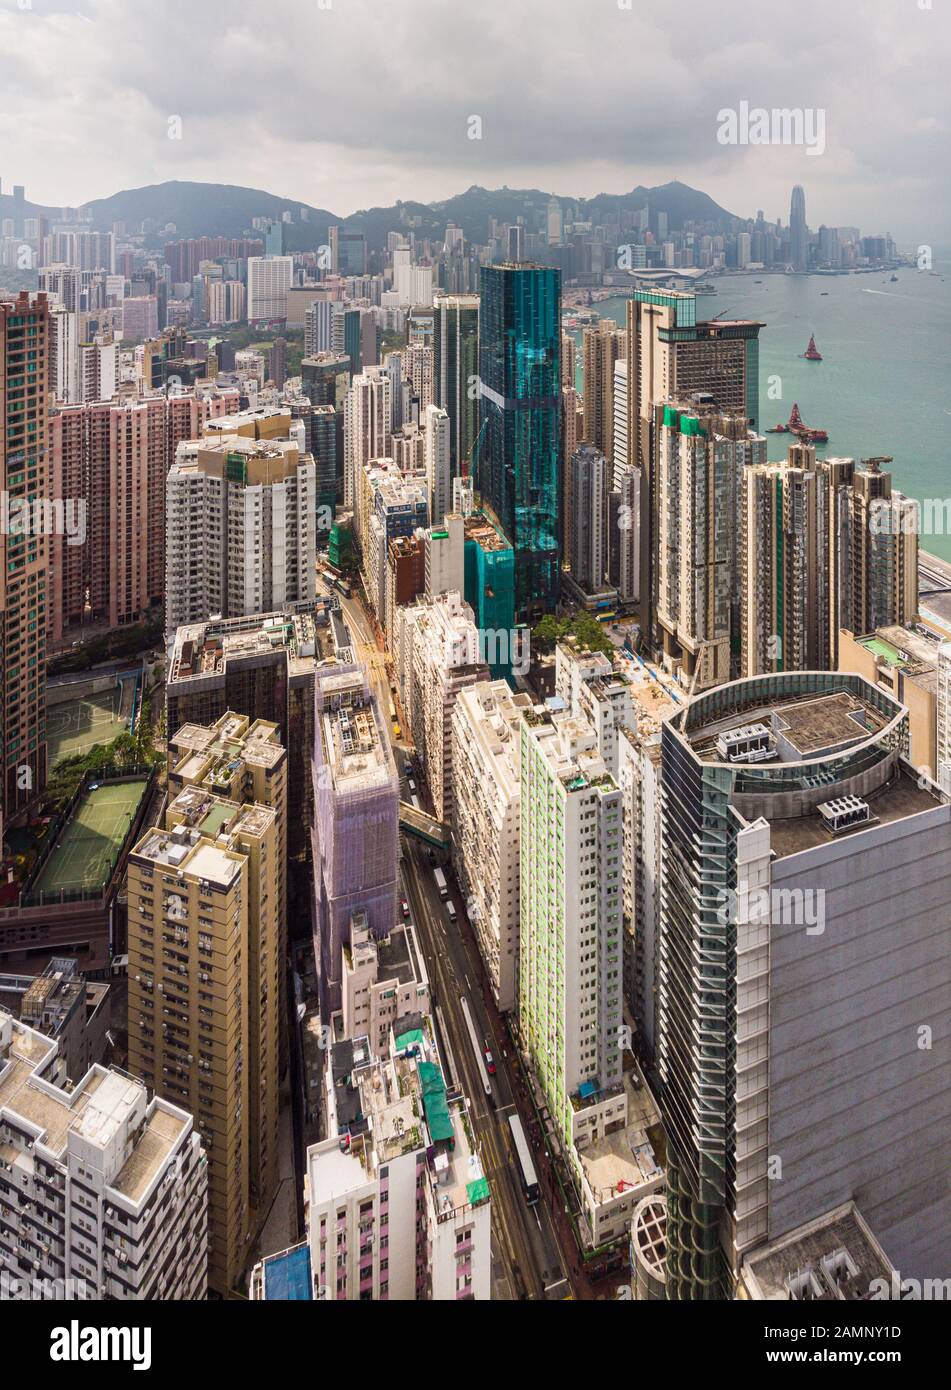 Aerial view of the very dense North Point district in Hong Kong island by the Victoria harbor Stock Photo